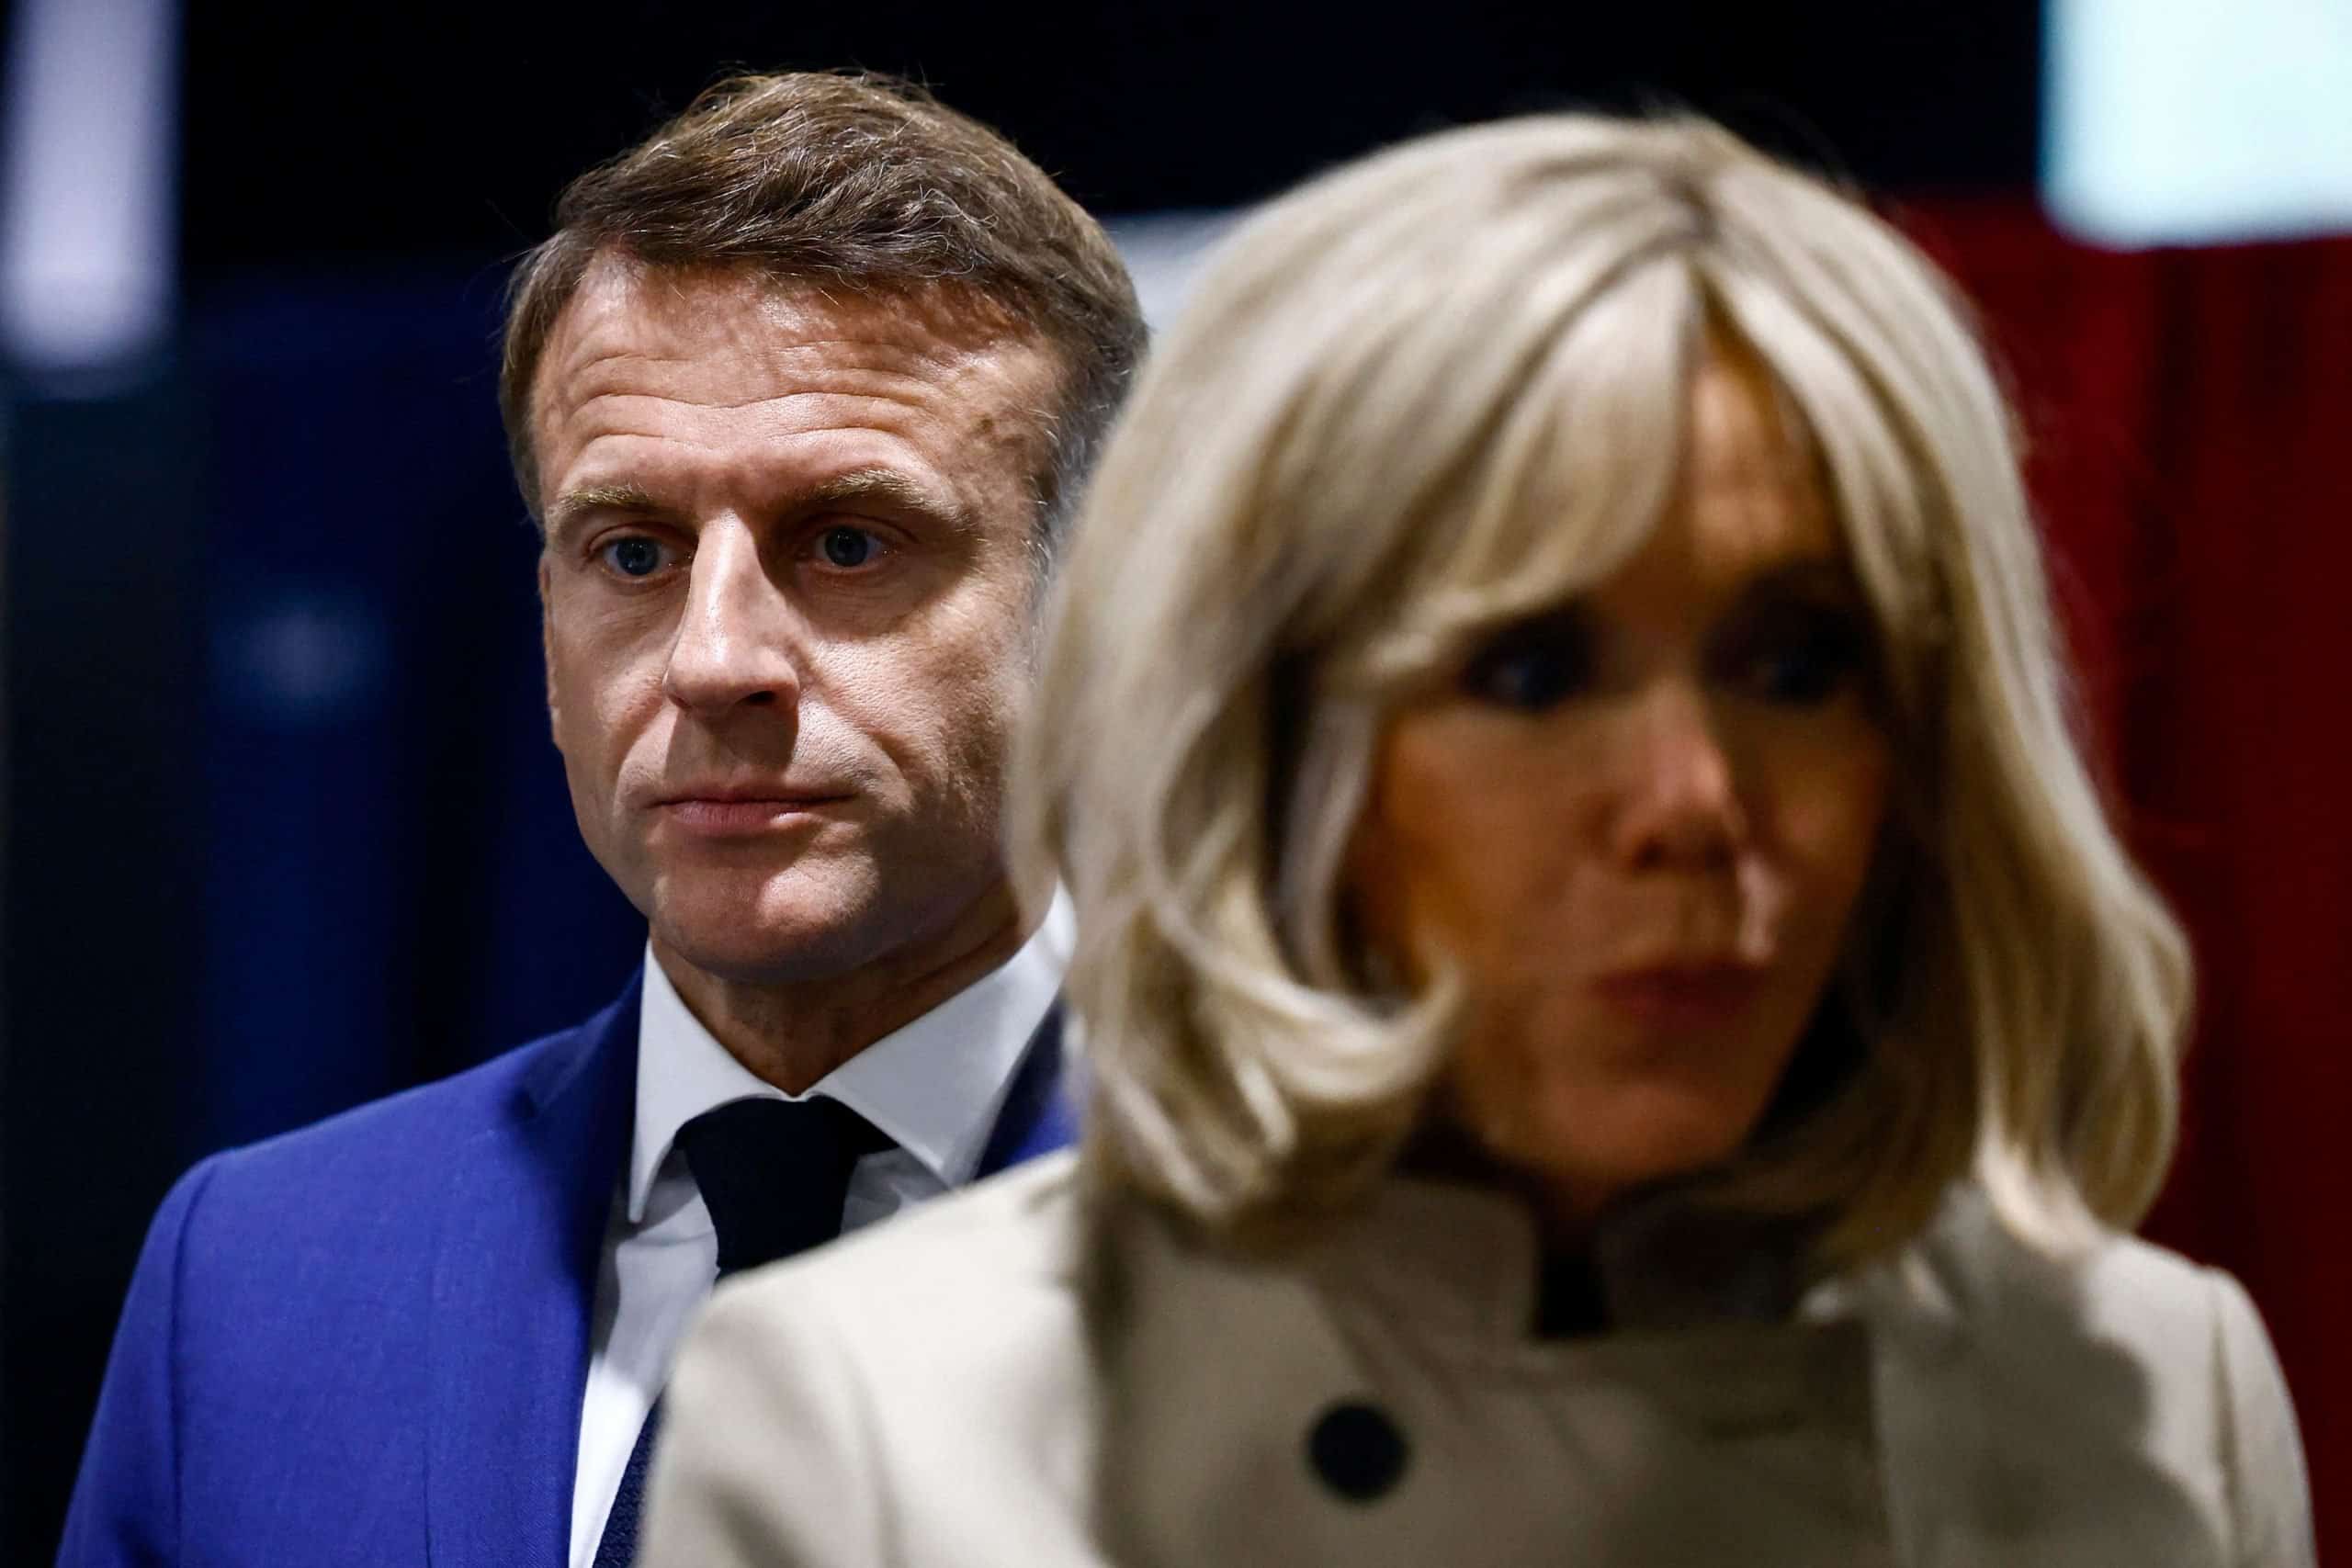 France plunged into political uncertainty as far-right make huge gains in election